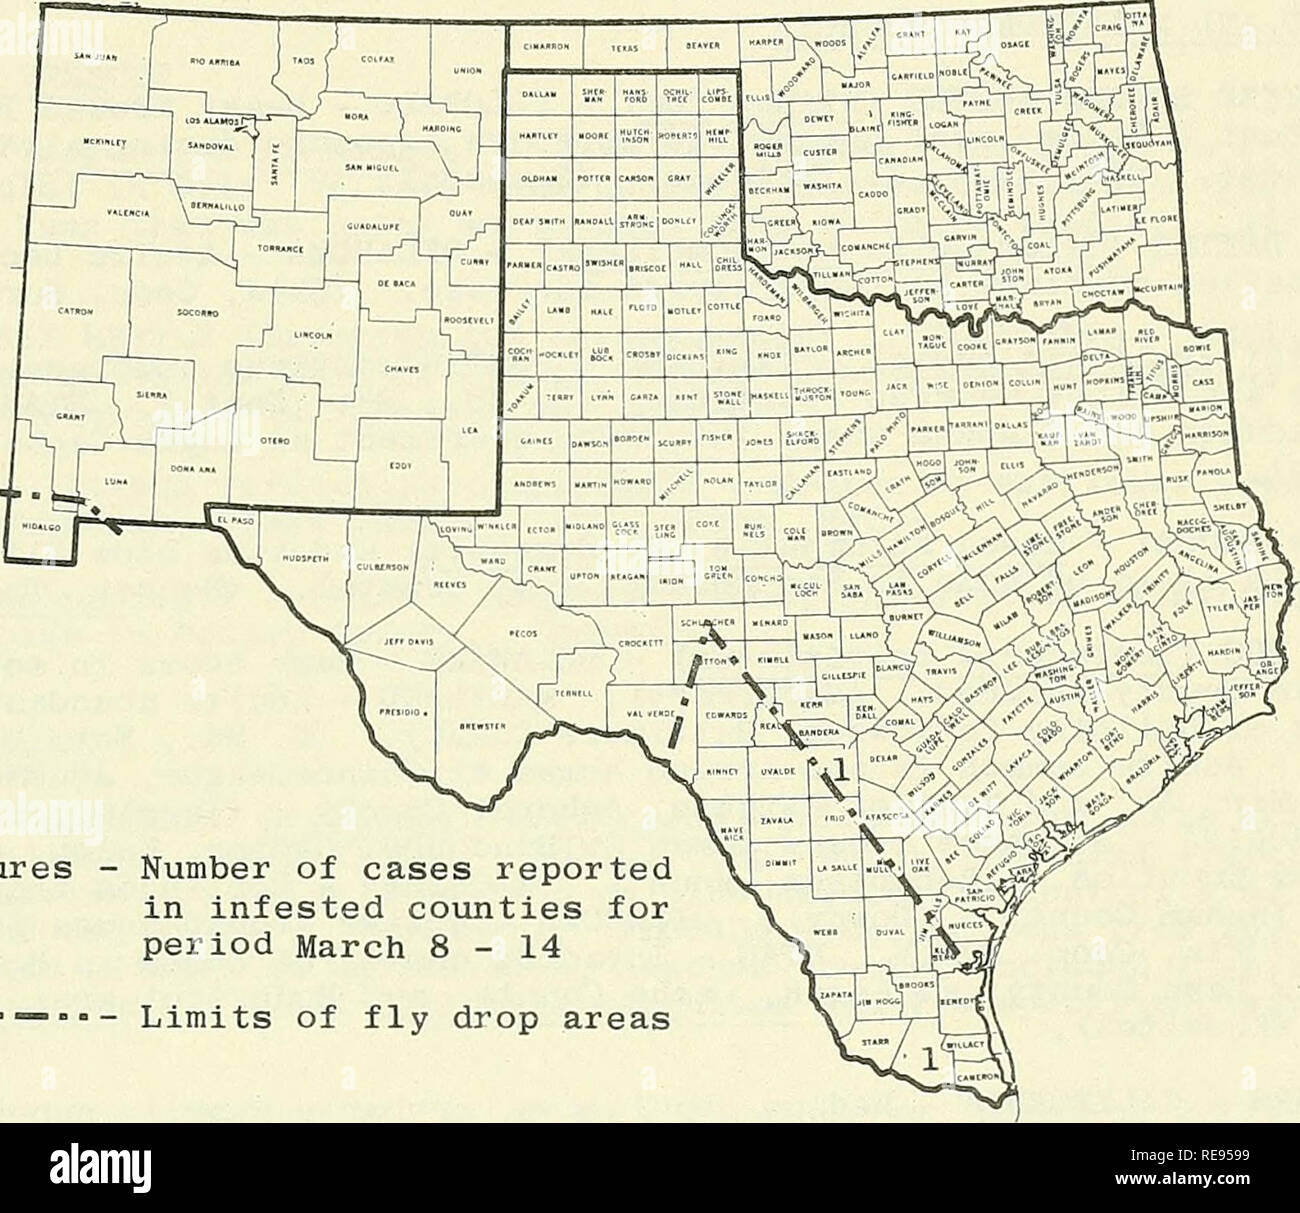 . Cooperative economic insect report. Beneficial insects; Insect pests. - 215 - INSECTS AFFECTING MAN AND ANIMALS STATUS OF THE SCREW-WORM (Cochliomyia homlnivorax) IN THE SOUTHWEST Two cases of myiasis have recently been disclosed in Texas. The first case found in dehorning wound of cow near Edinburg, Hidalgo County, March 11. Second case found in herd near Castroville, Medina County. The herds have been treated with a pesticide and the areas involved are receiving extra sterile screw-worm flies each week to supress outbreaks. Texas livestock producers submitted 81 samples which were not scre Stock Photo